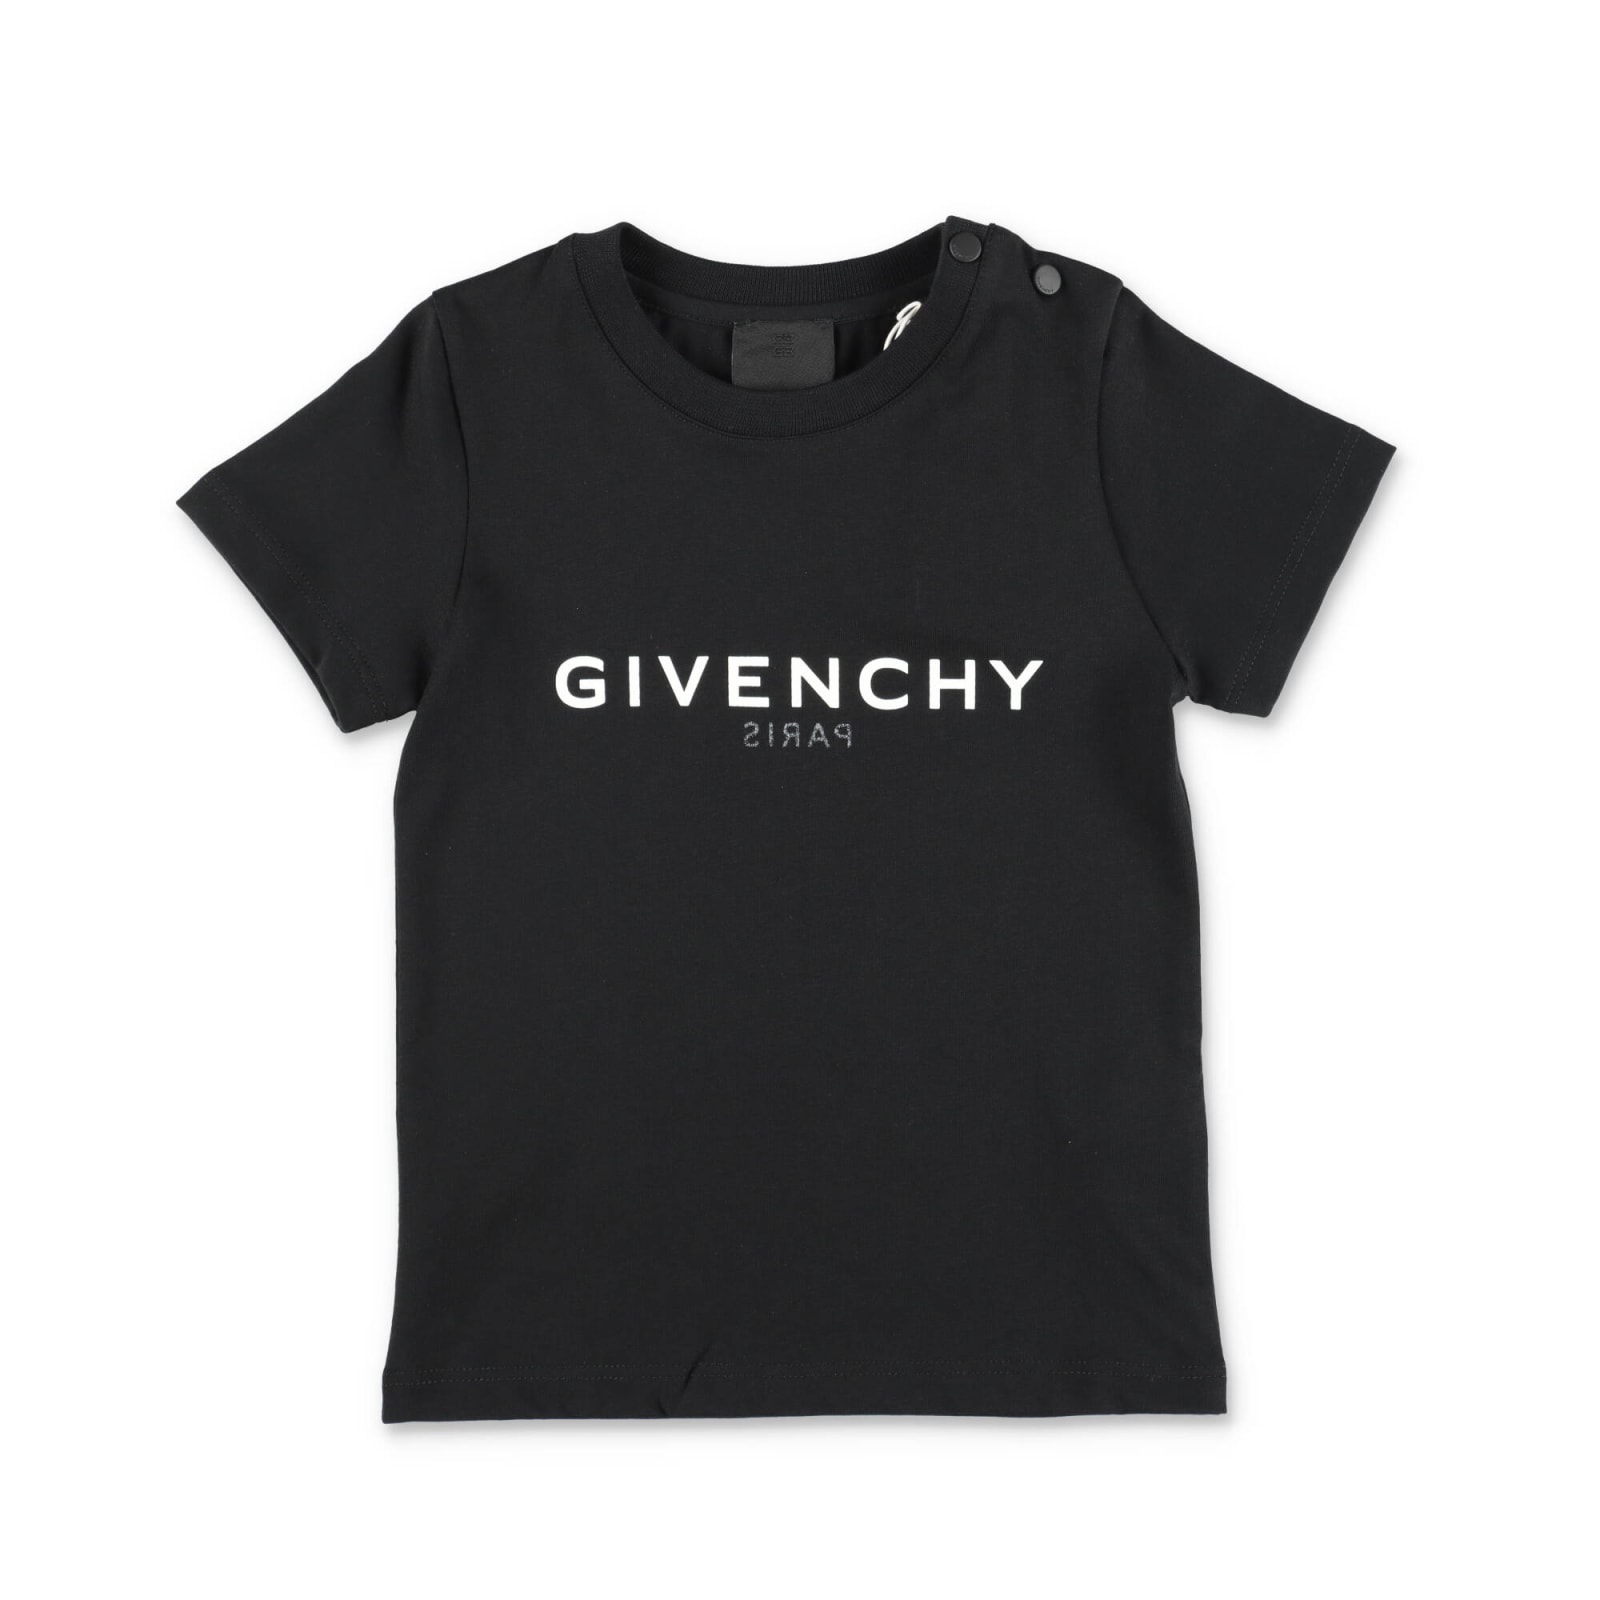 Givenchy T-shirt Nera In Jersey Di Cotone Baby Boy